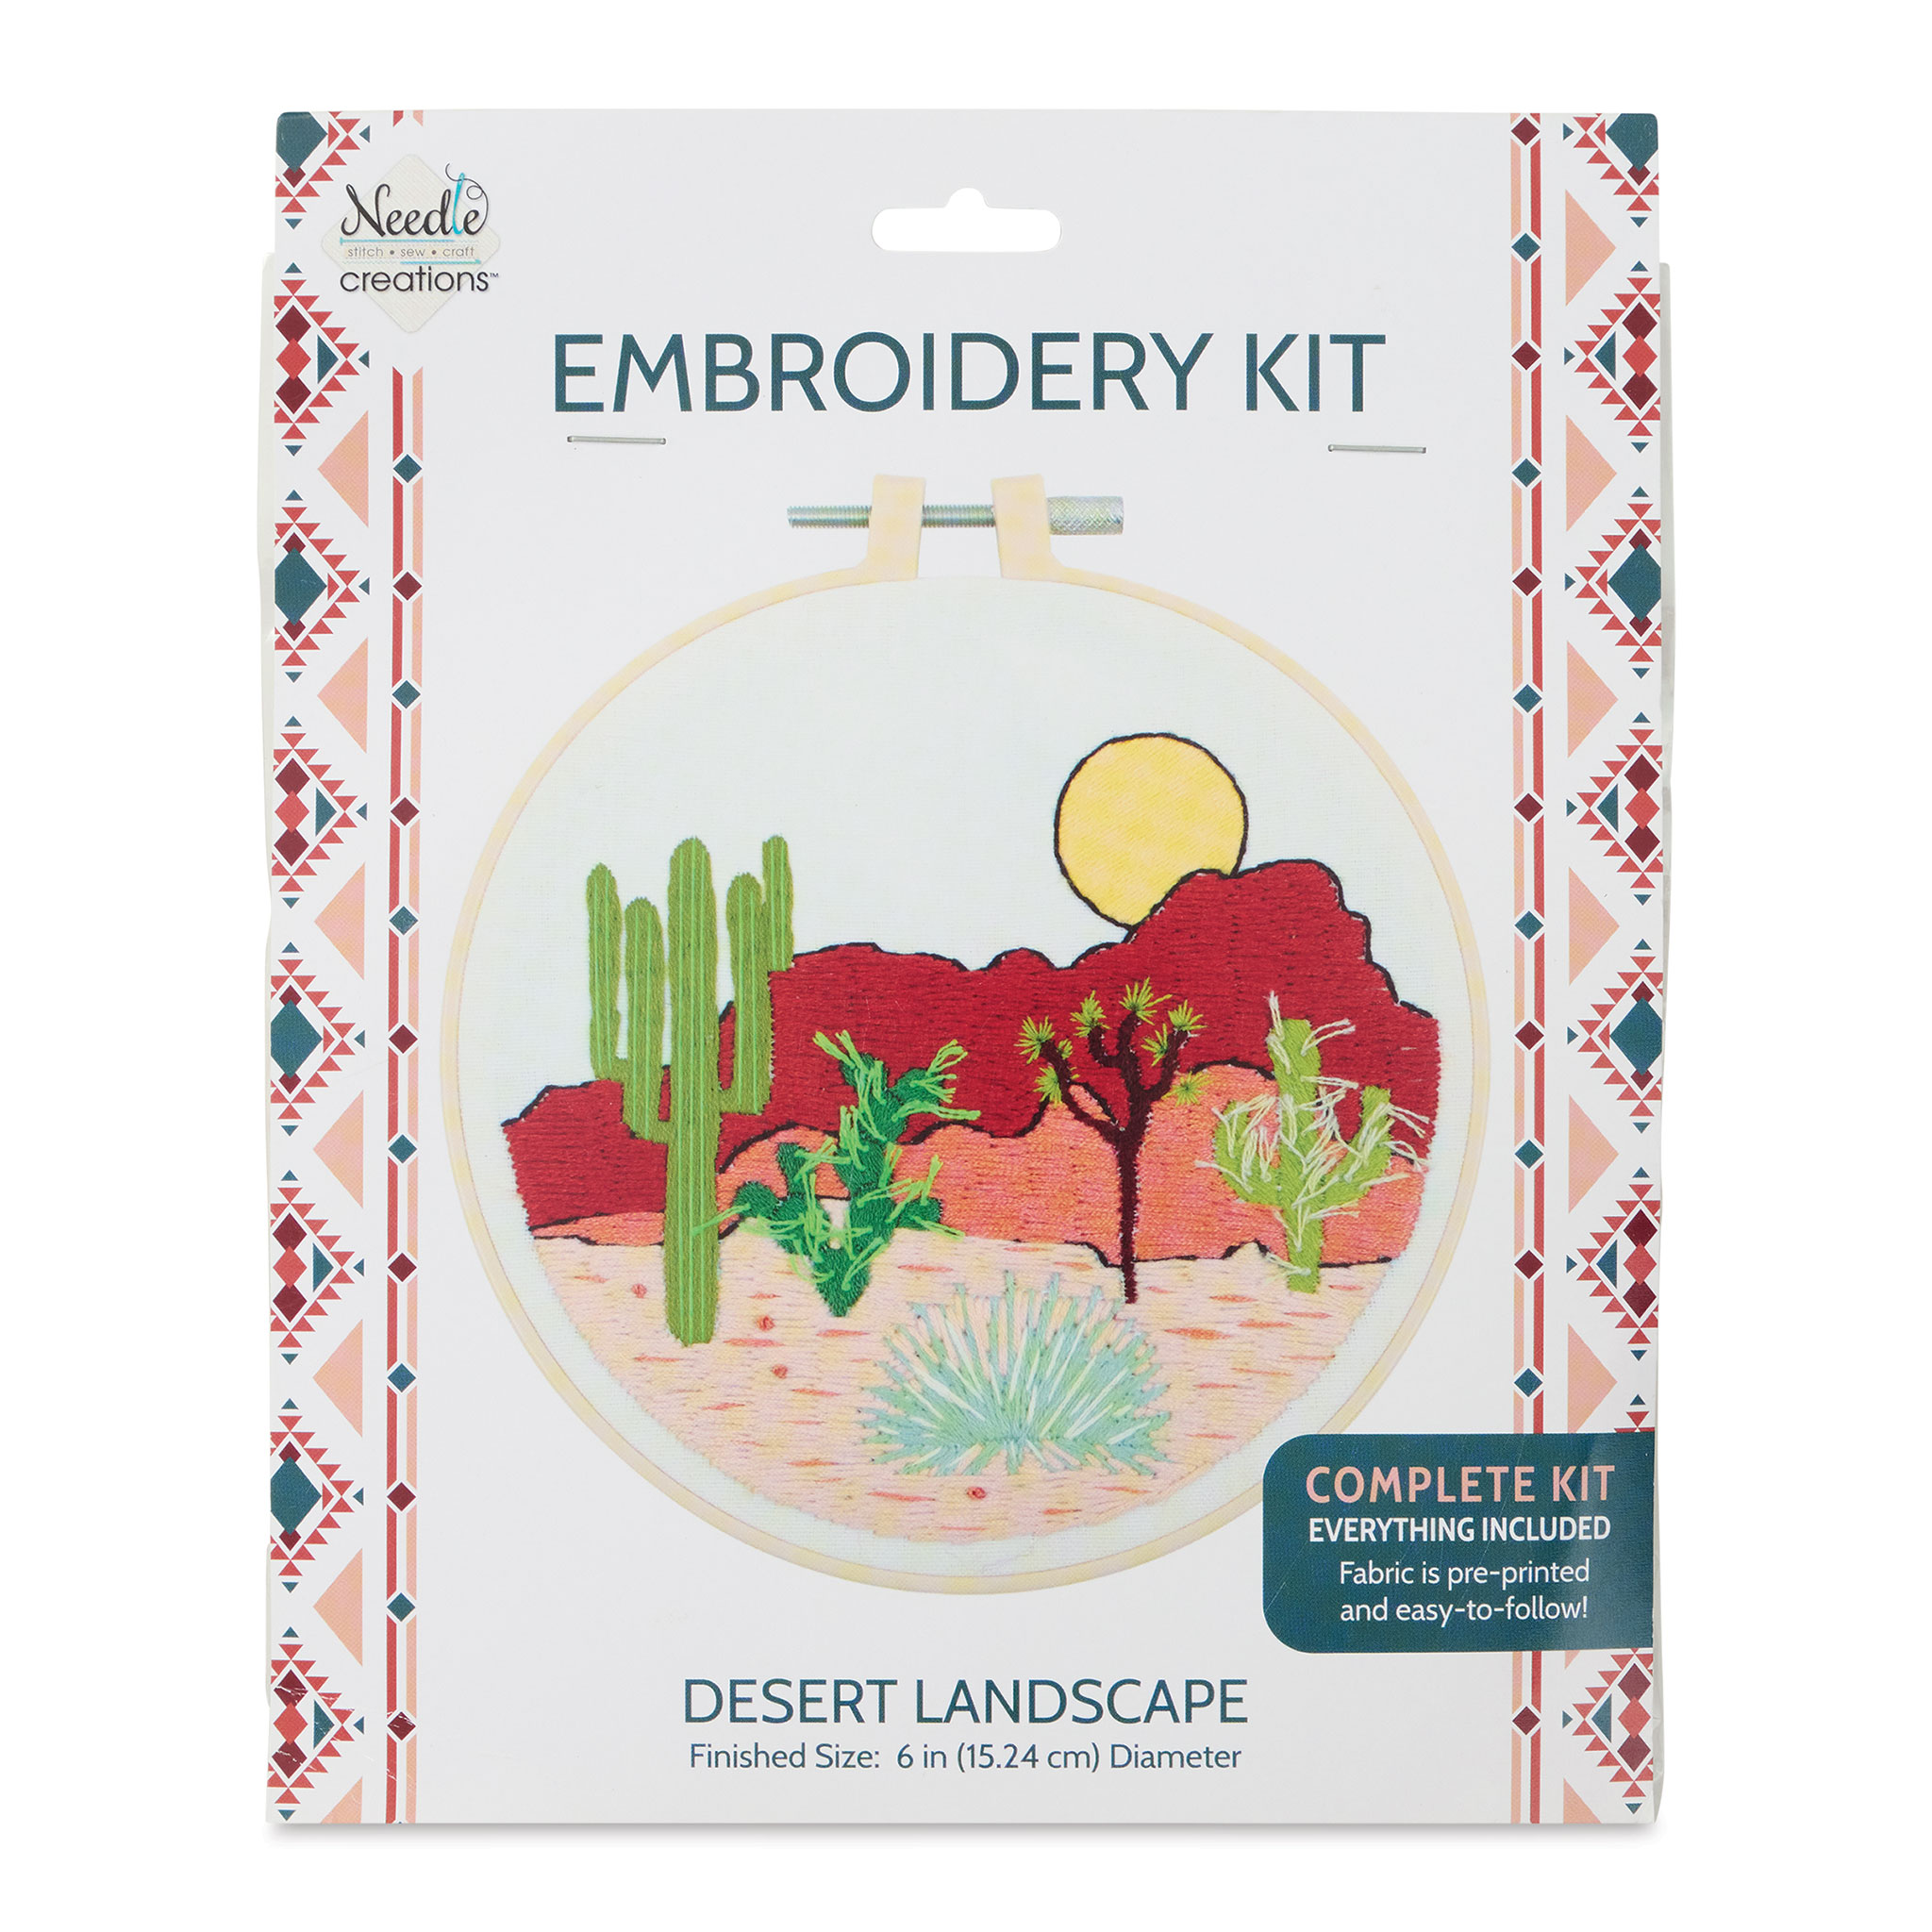 Full Coverage Bead Embroidery Kit Landscape. DIY Beading Nature